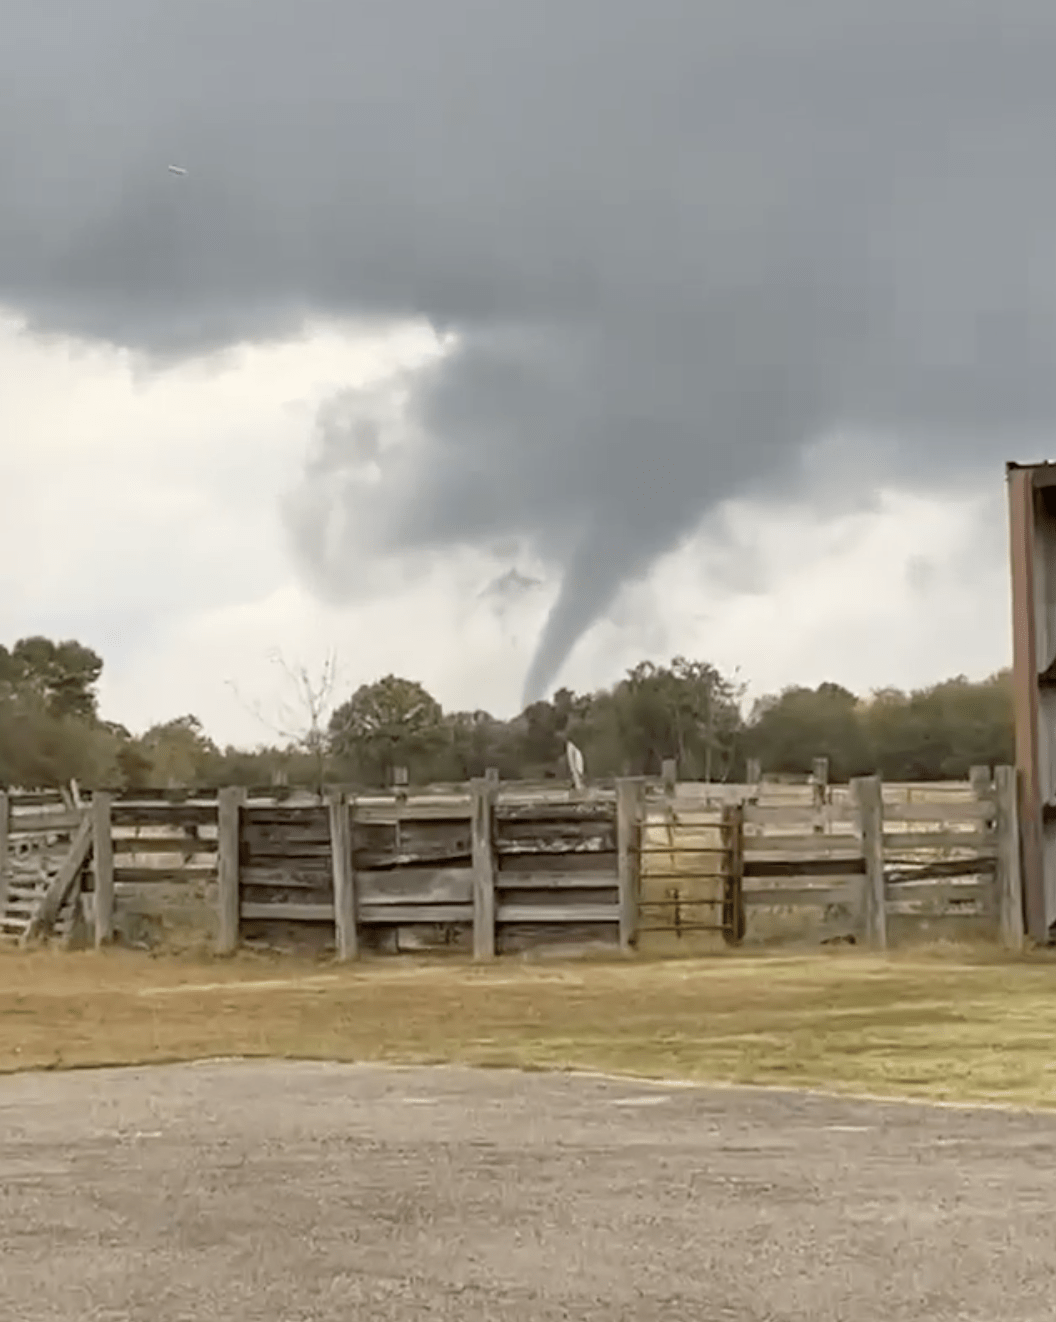 Two confirmed tornadoes hit Miller Grove, Greenview